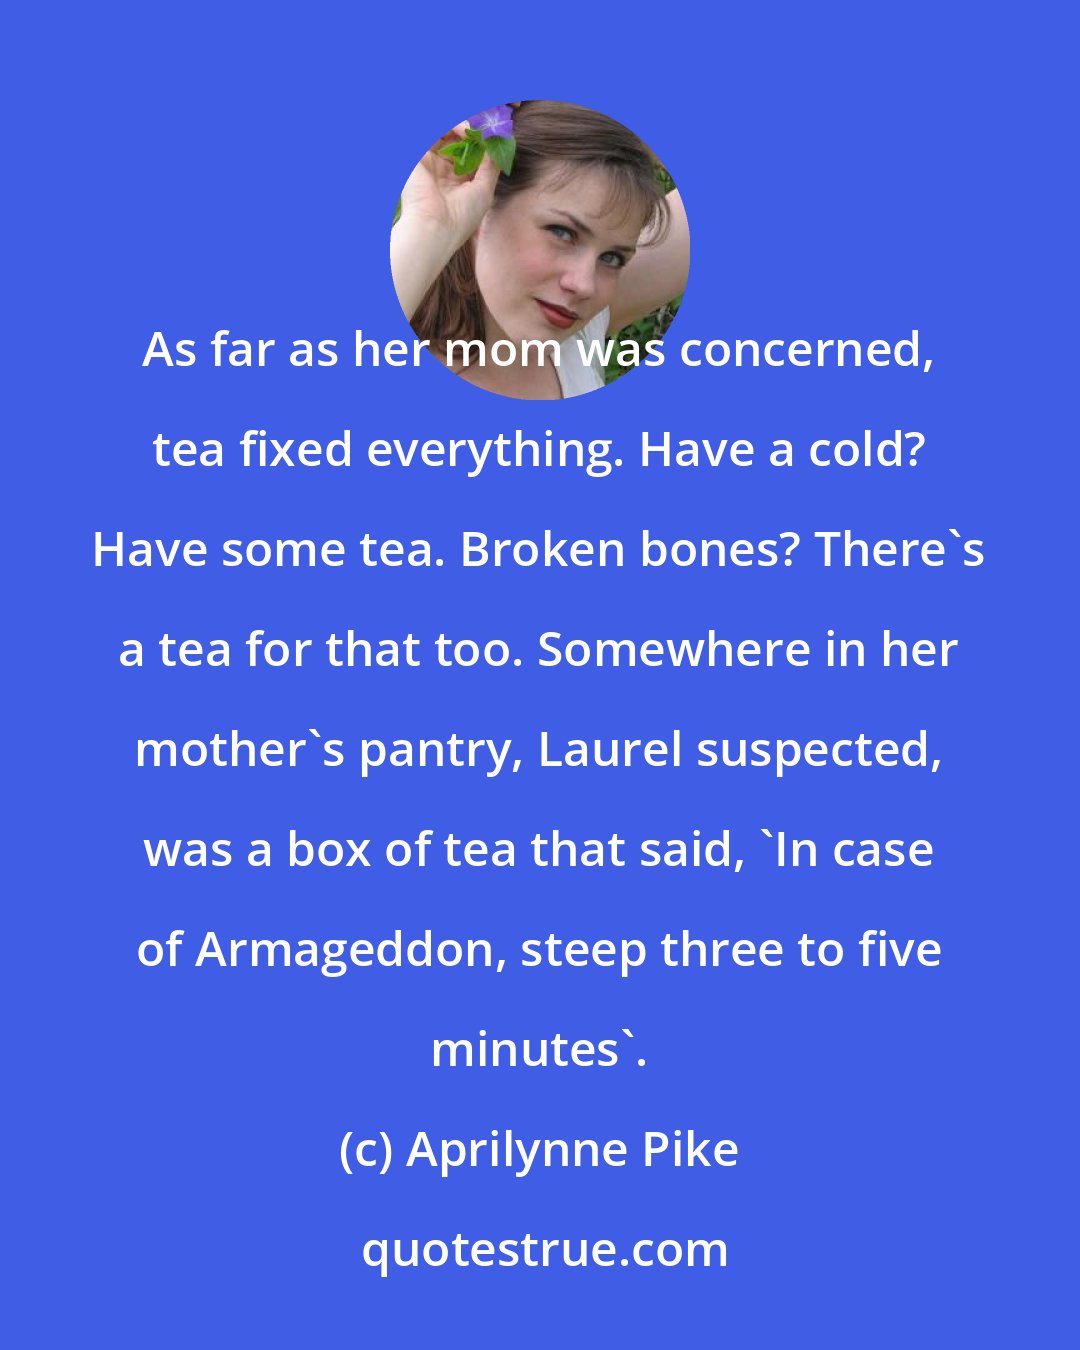 Aprilynne Pike: As far as her mom was concerned, tea fixed everything. Have a cold? Have some tea. Broken bones? There's a tea for that too. Somewhere in her mother's pantry, Laurel suspected, was a box of tea that said, 'In case of Armageddon, steep three to five minutes'.